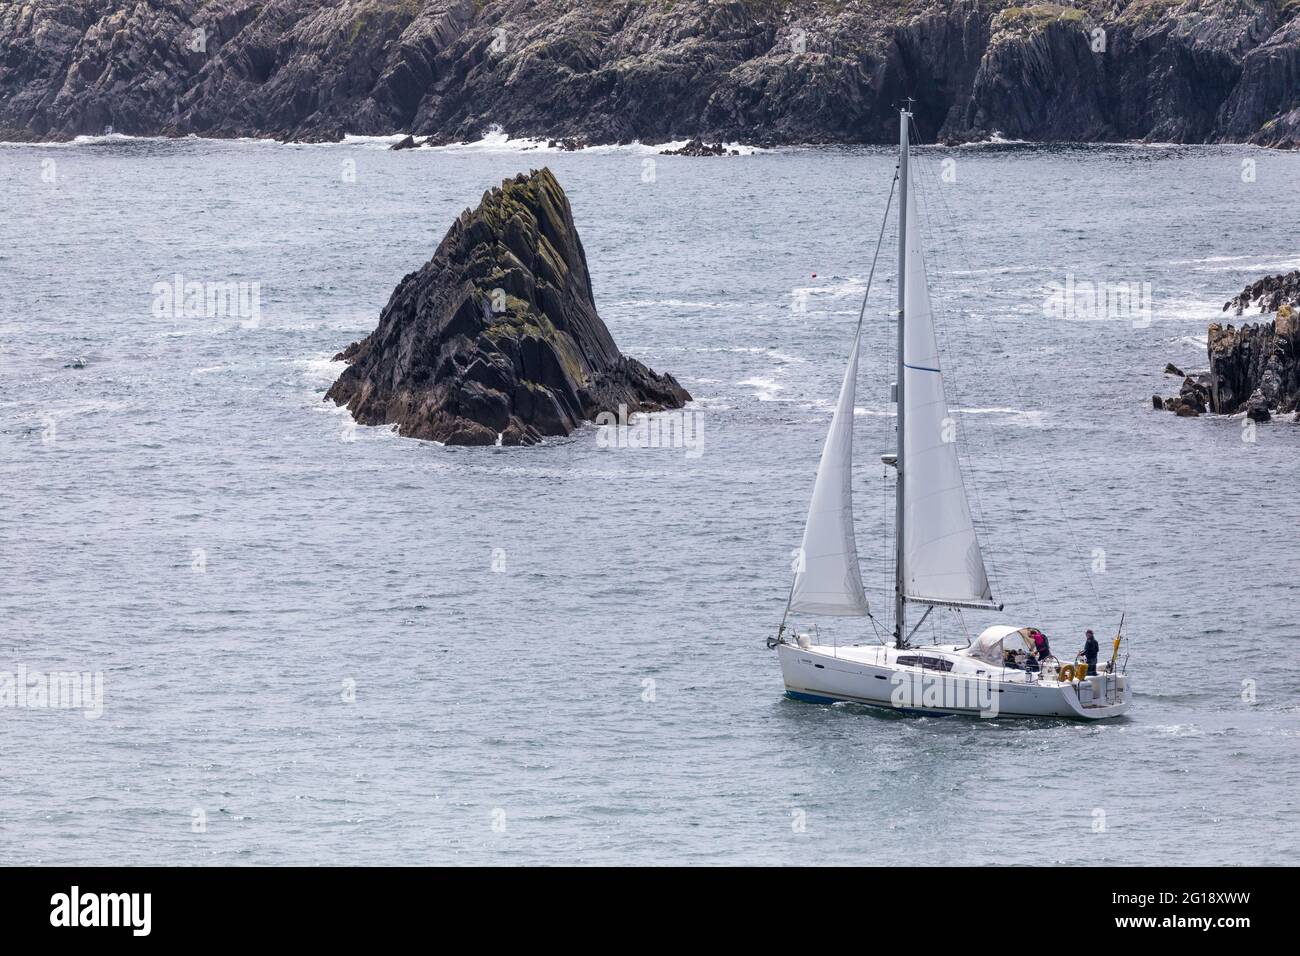 Baltimore, Cork, Ireland. 05th June, 2021. The yacht Inisleigh sails out under full canvas aroud the jagged coastline outside Baltimore Harbour in West Cork, Ireland. -Credit; David Creedon / Alamy Live News Stock Photo